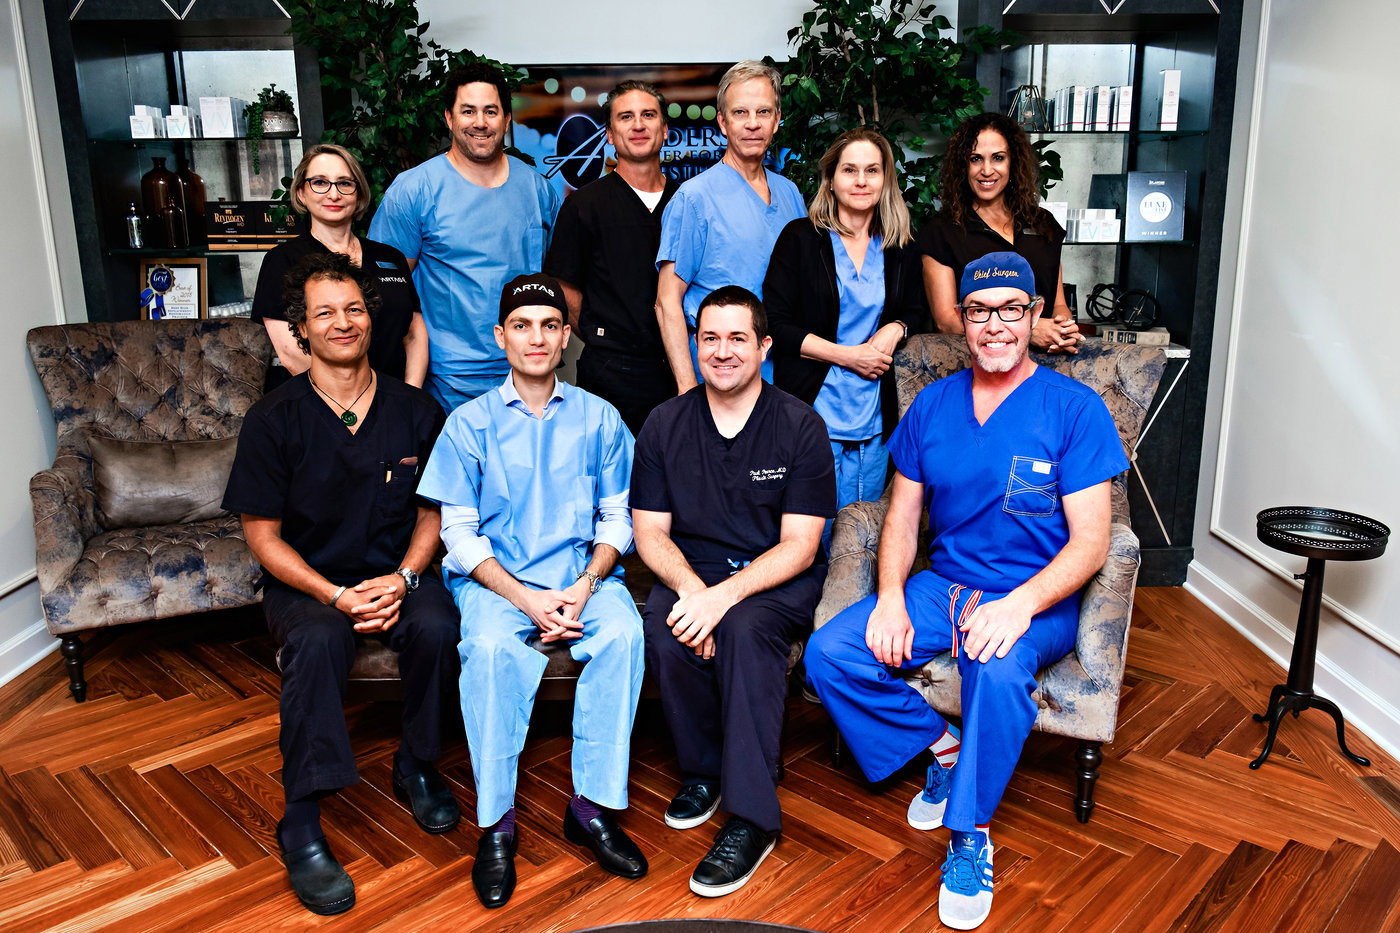 Dr. Ken Anderson teaches a Masters’ Class at the American Academy of Hair Restoration Surgery (AAHRS) in Alpharetta, GA in 2019.